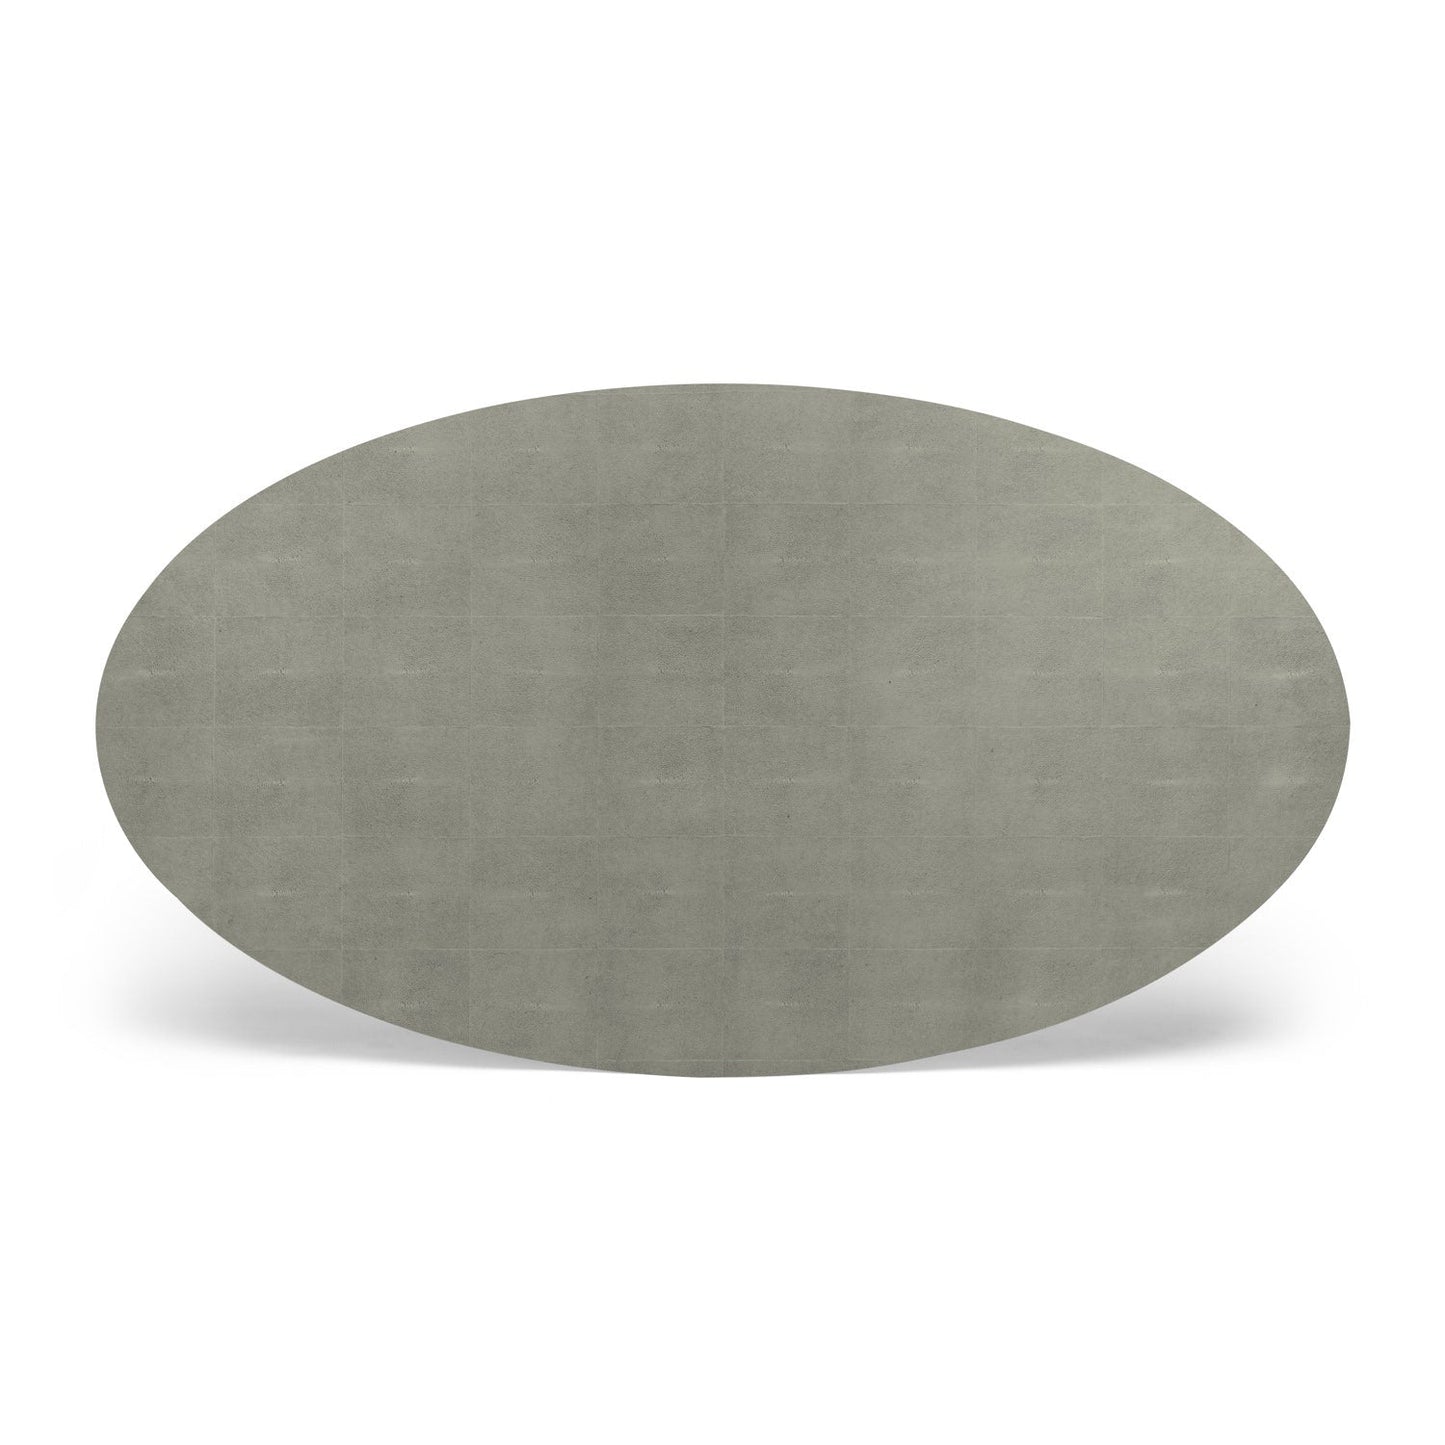 Made Goods Dane 96" x 44" x 30" White Cerused Oak Dinning Table With Oval Castor Gray Vintage Faux Shagreen Table Top